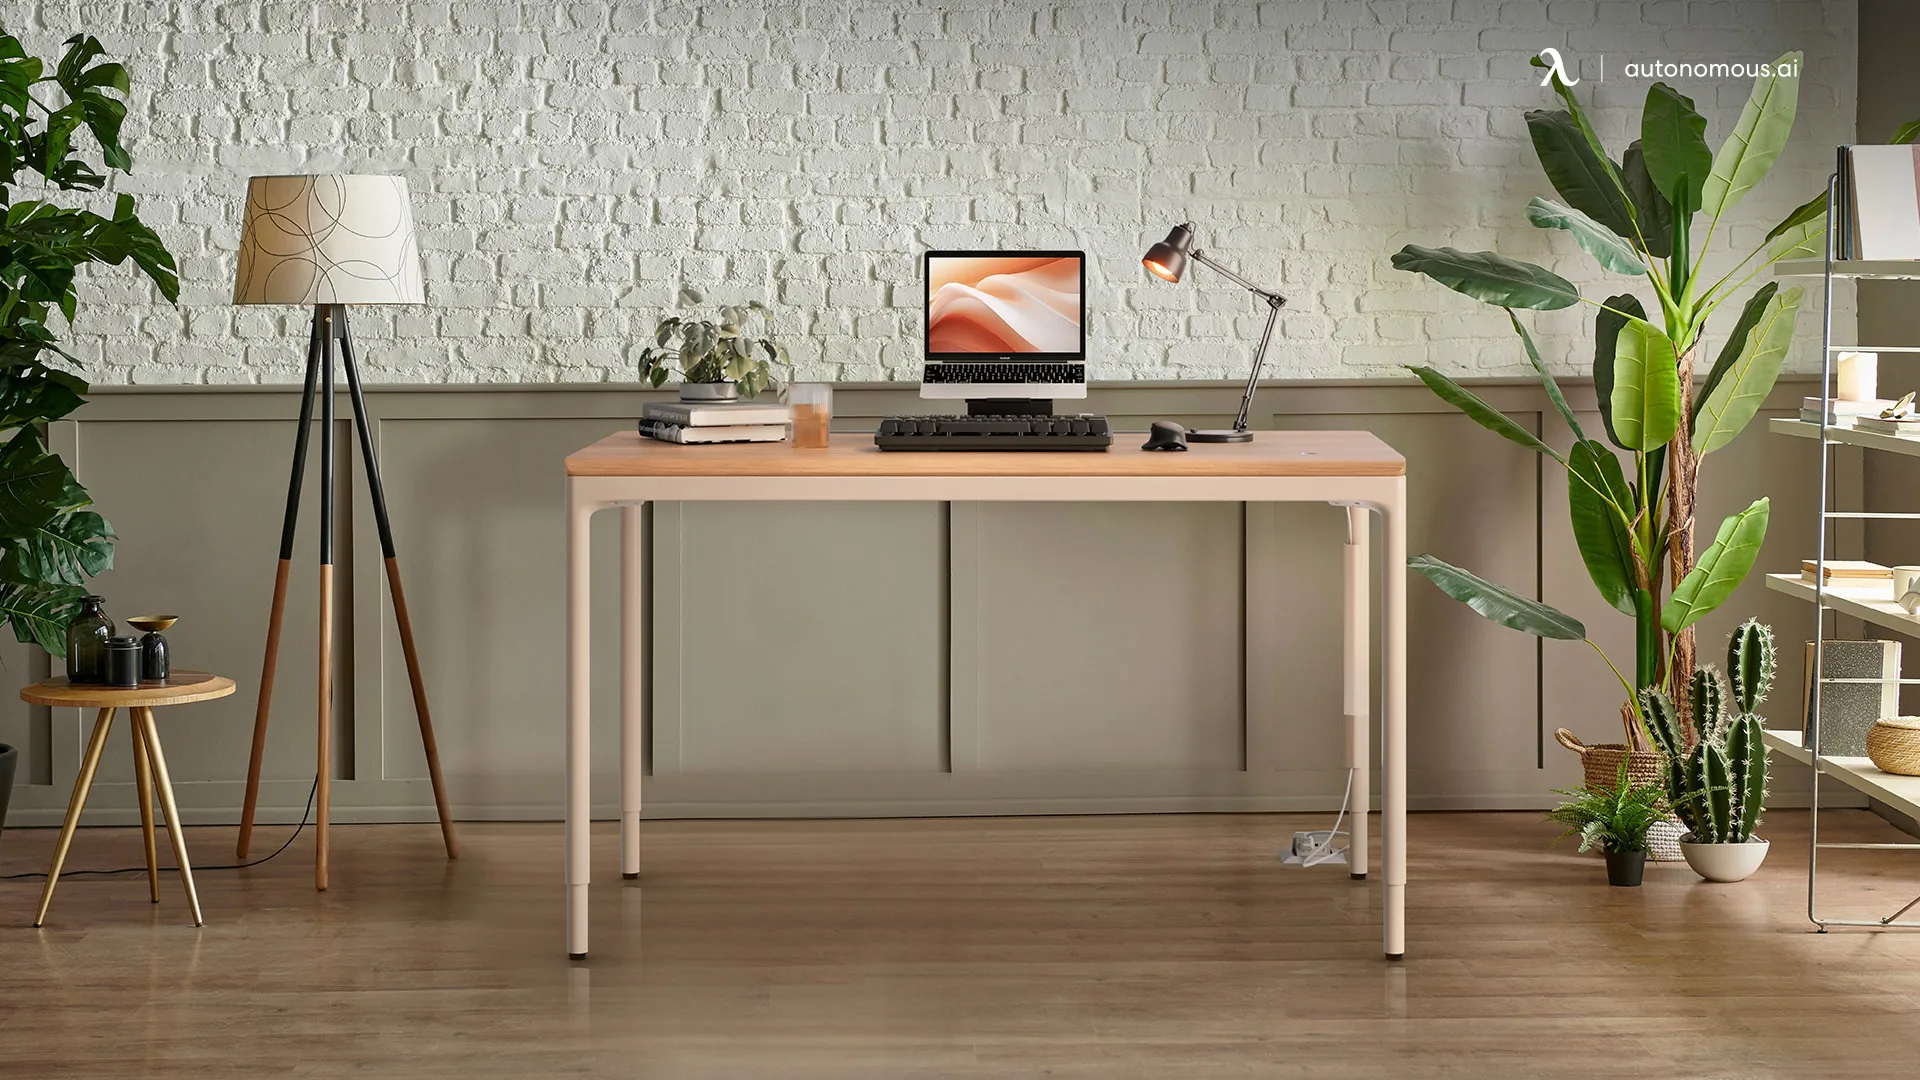 How to Lock and Unlock a Standing Desk?